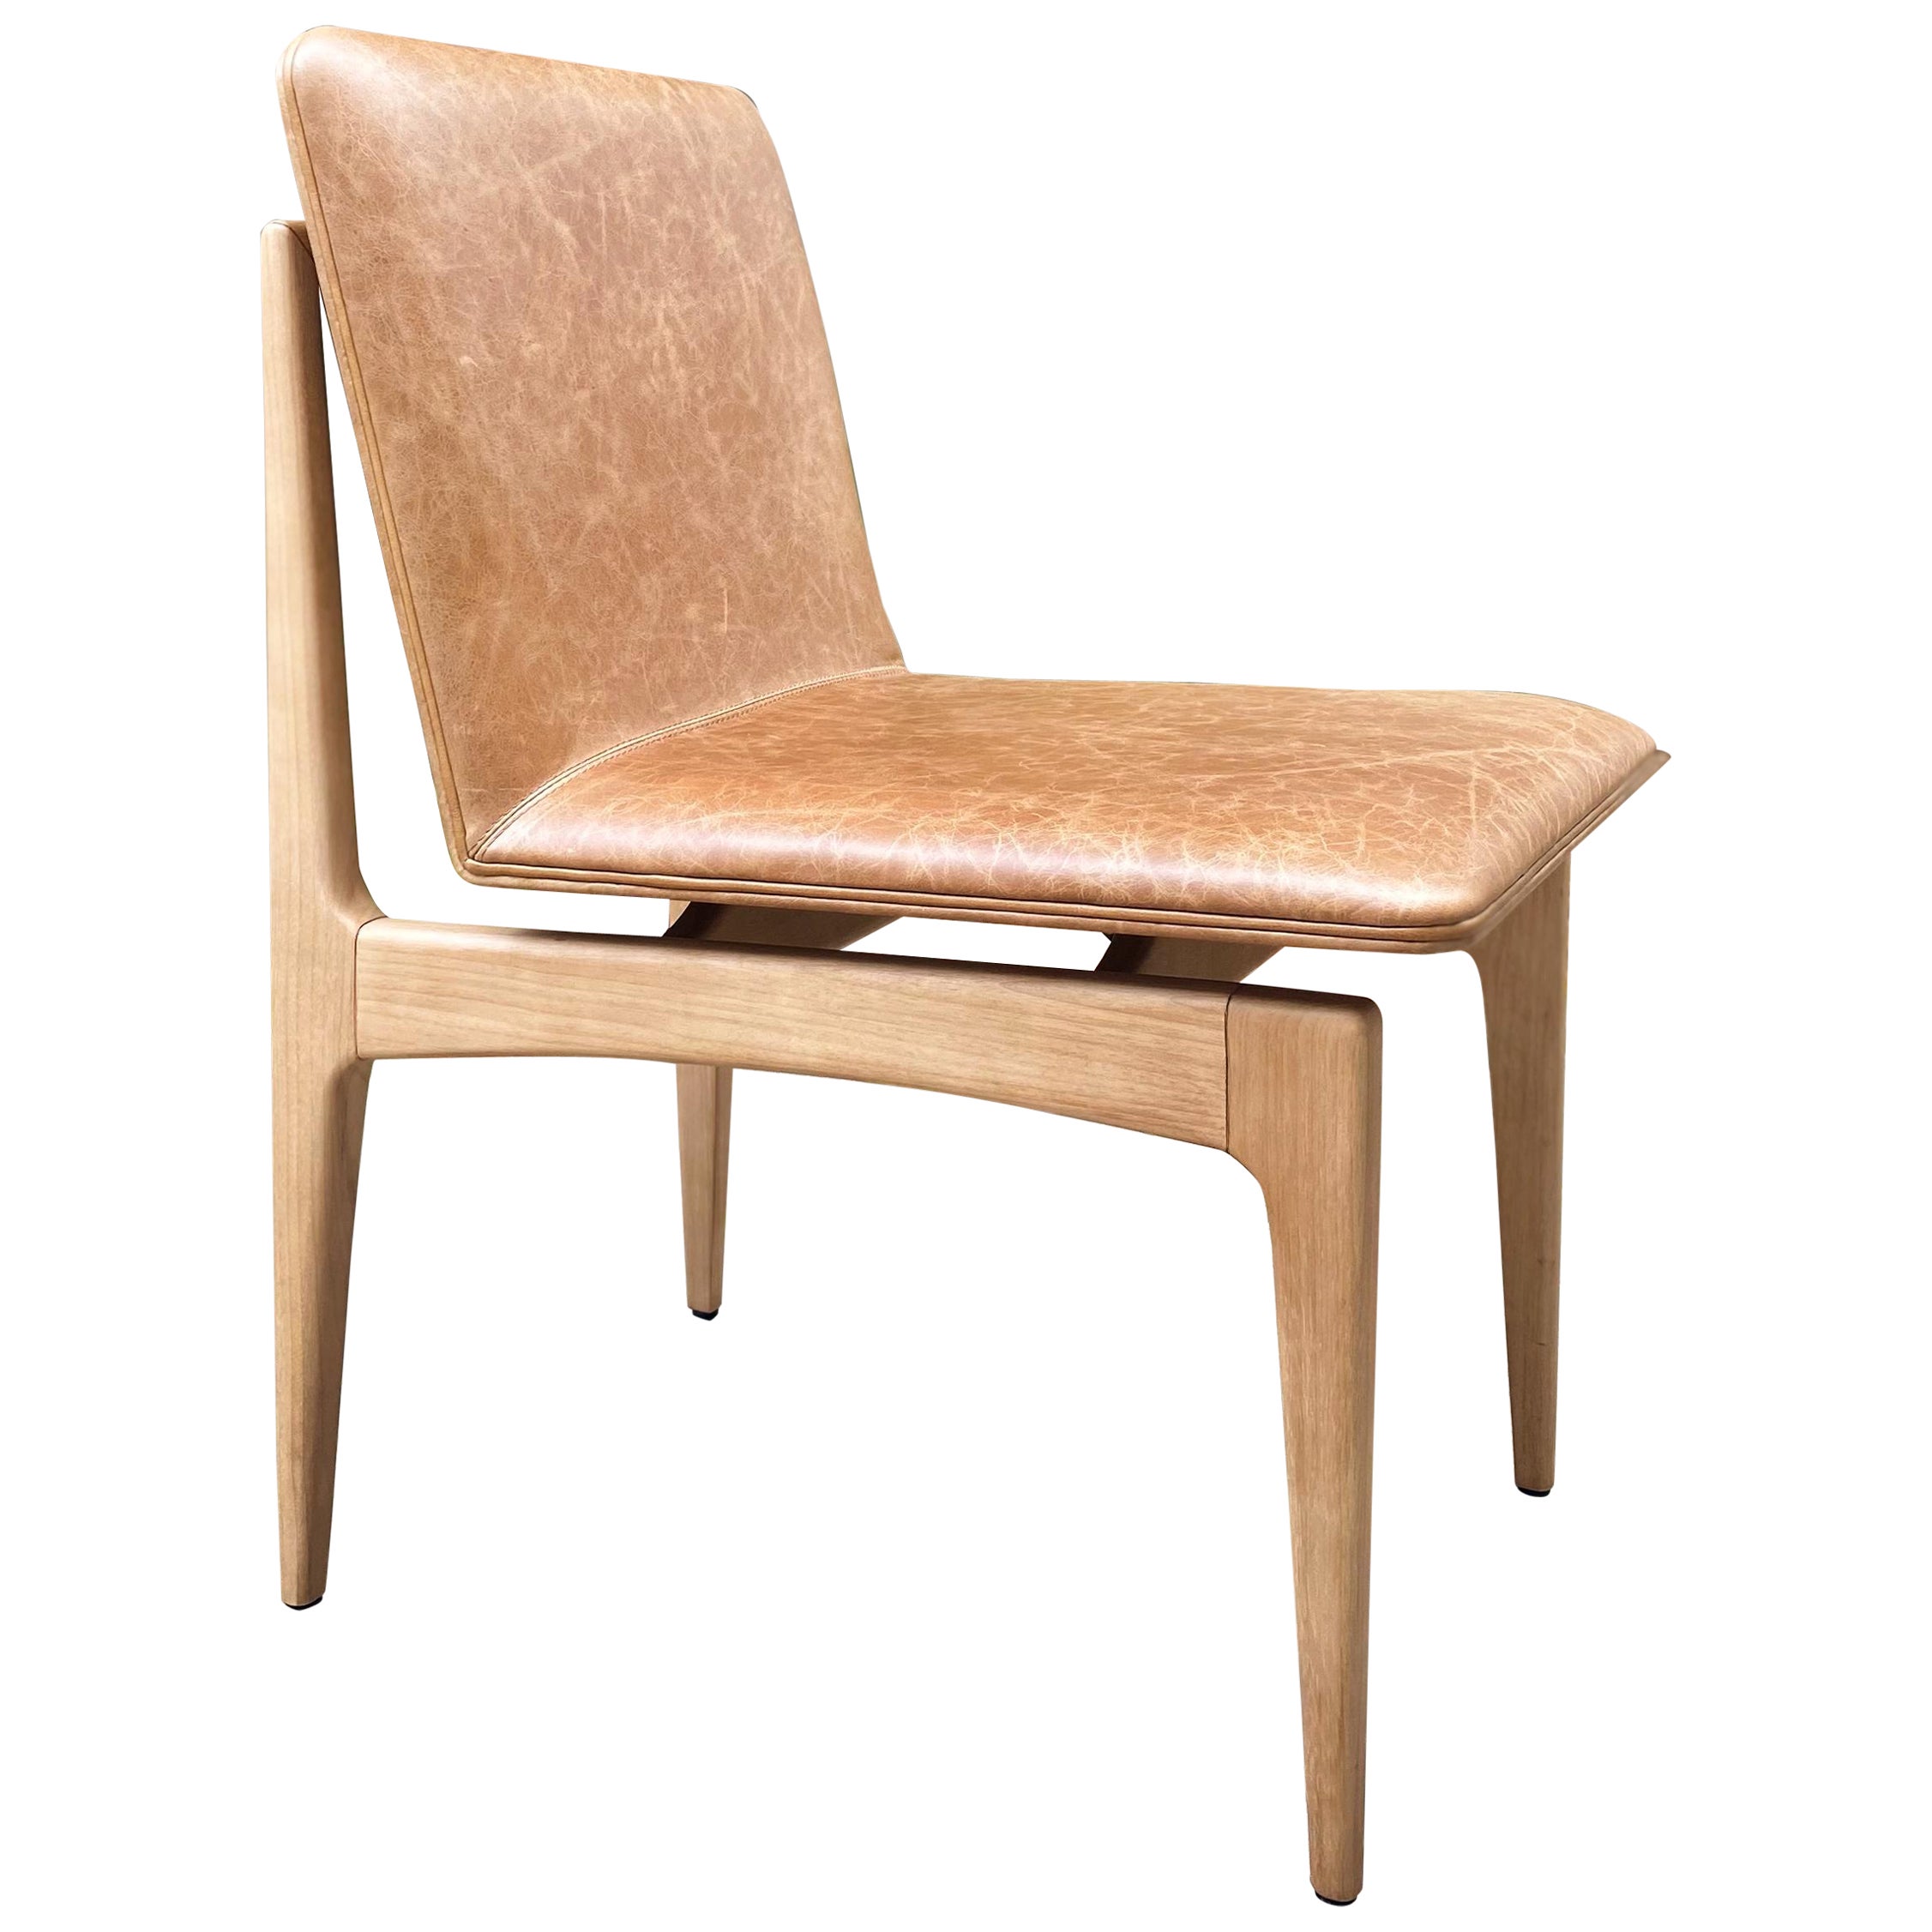 "Oscar" Minimalist Chair in Solid  Wood with Leather or Fabric